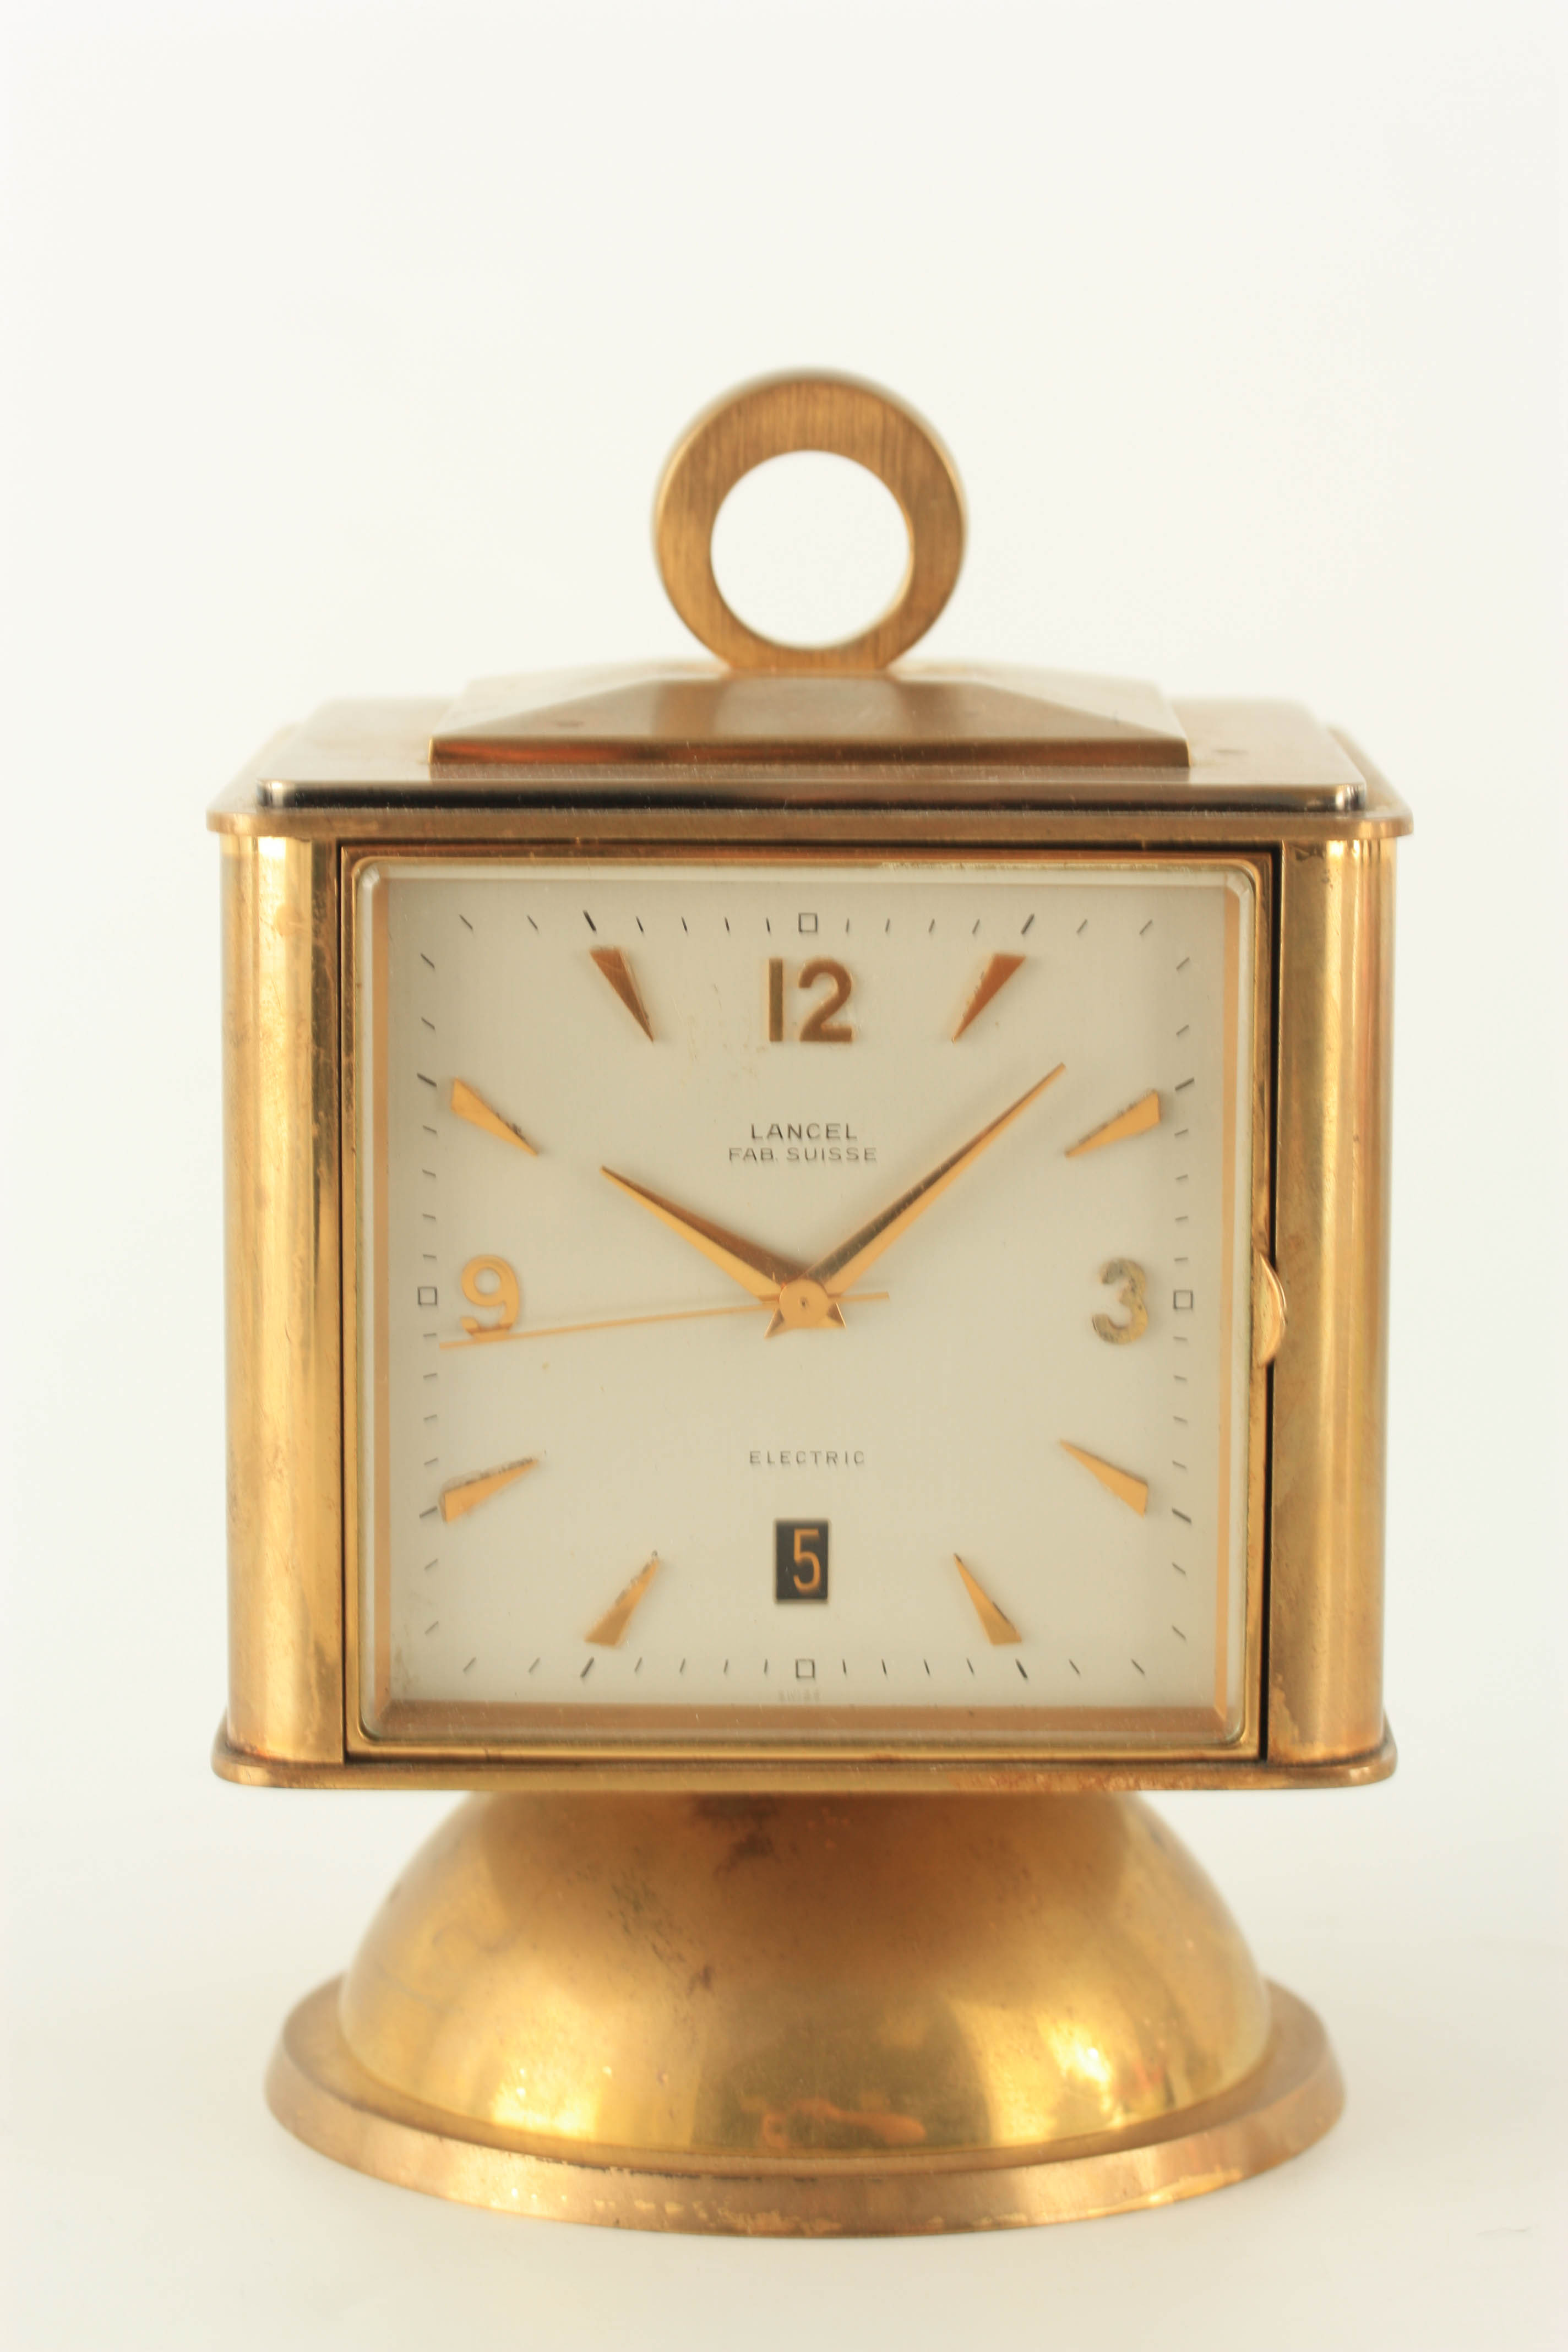 A LANCEL, 1950's SWISS GILT BRASS PORTABLE DESK CLOCK/WEATHER STATION the revolving cube body with - Image 2 of 6